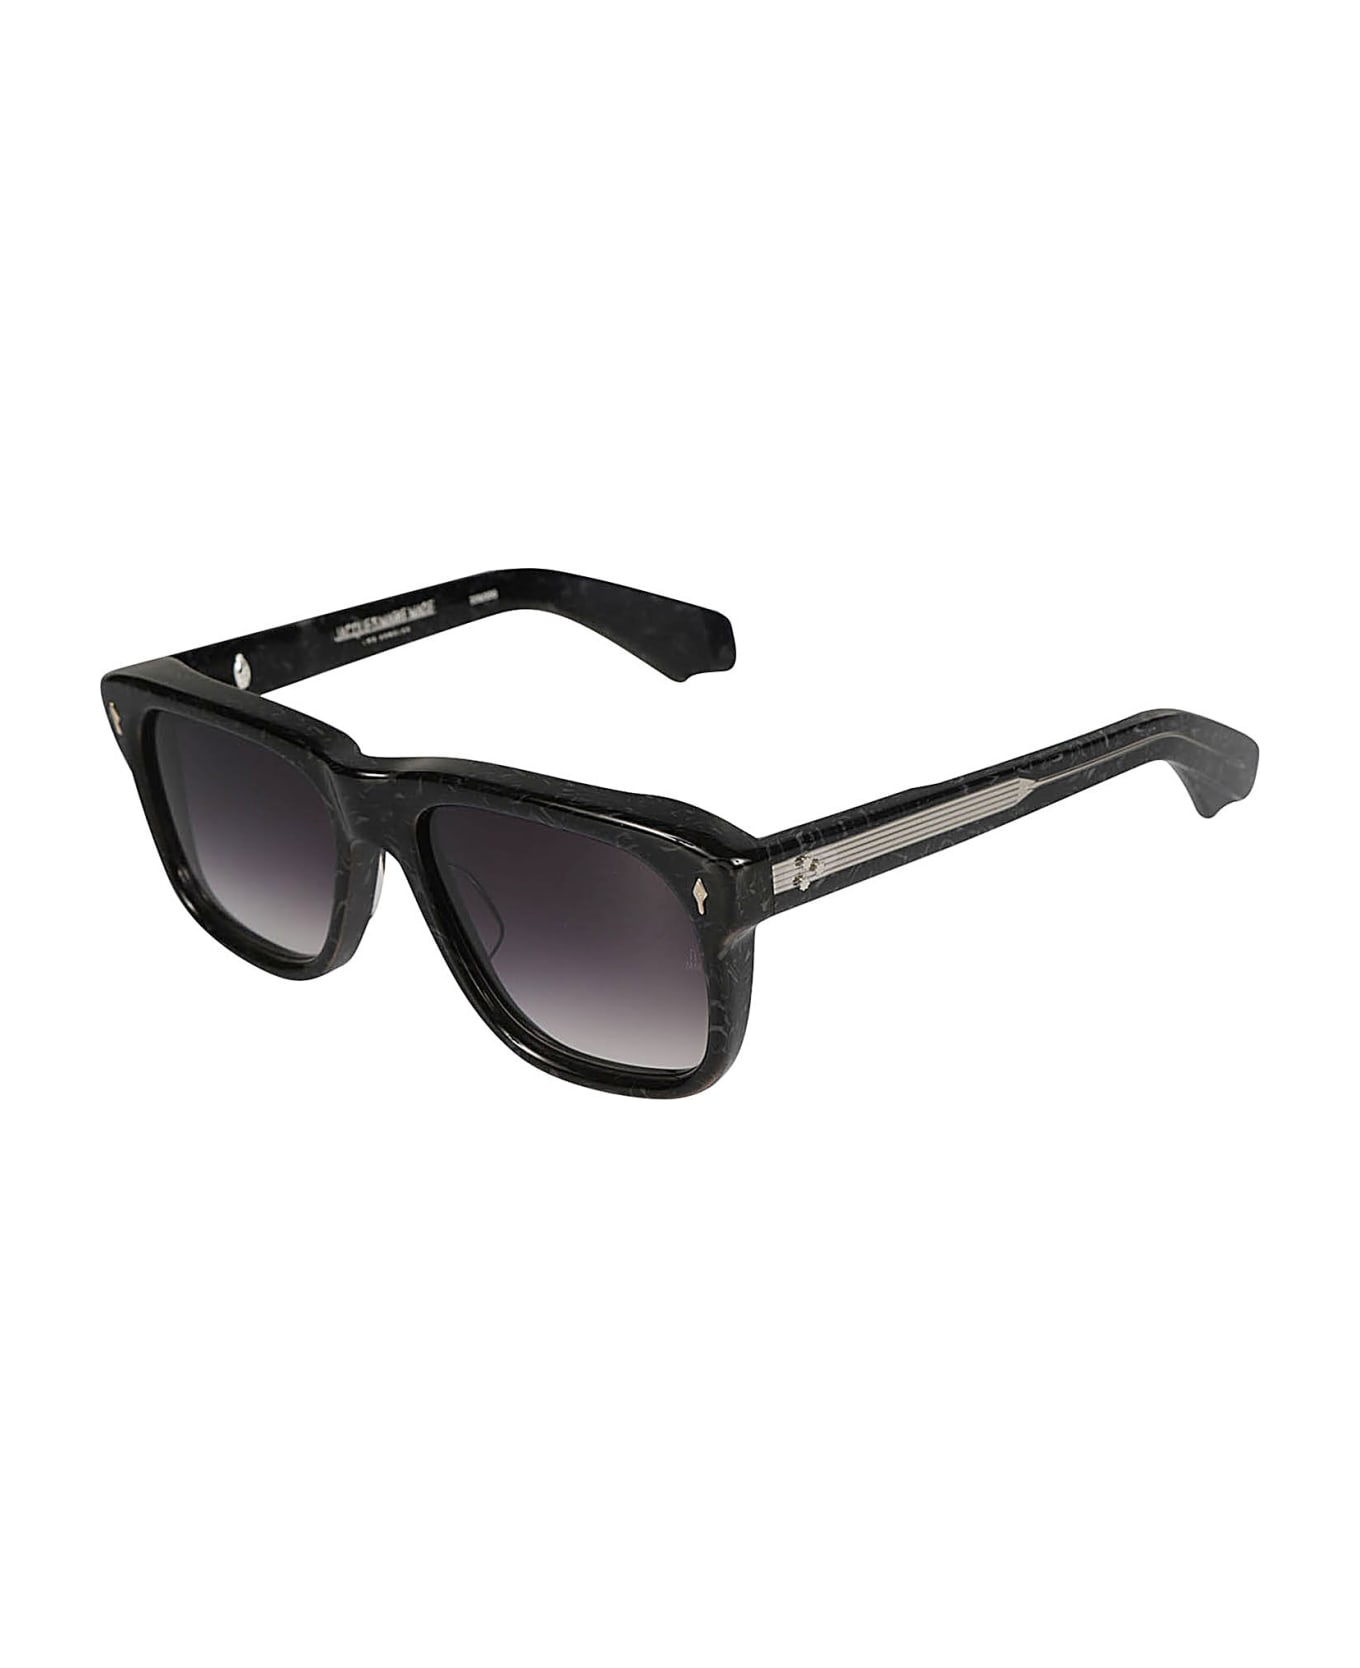 Jacques Marie Mage Yves Sunglasses - 10s-slate